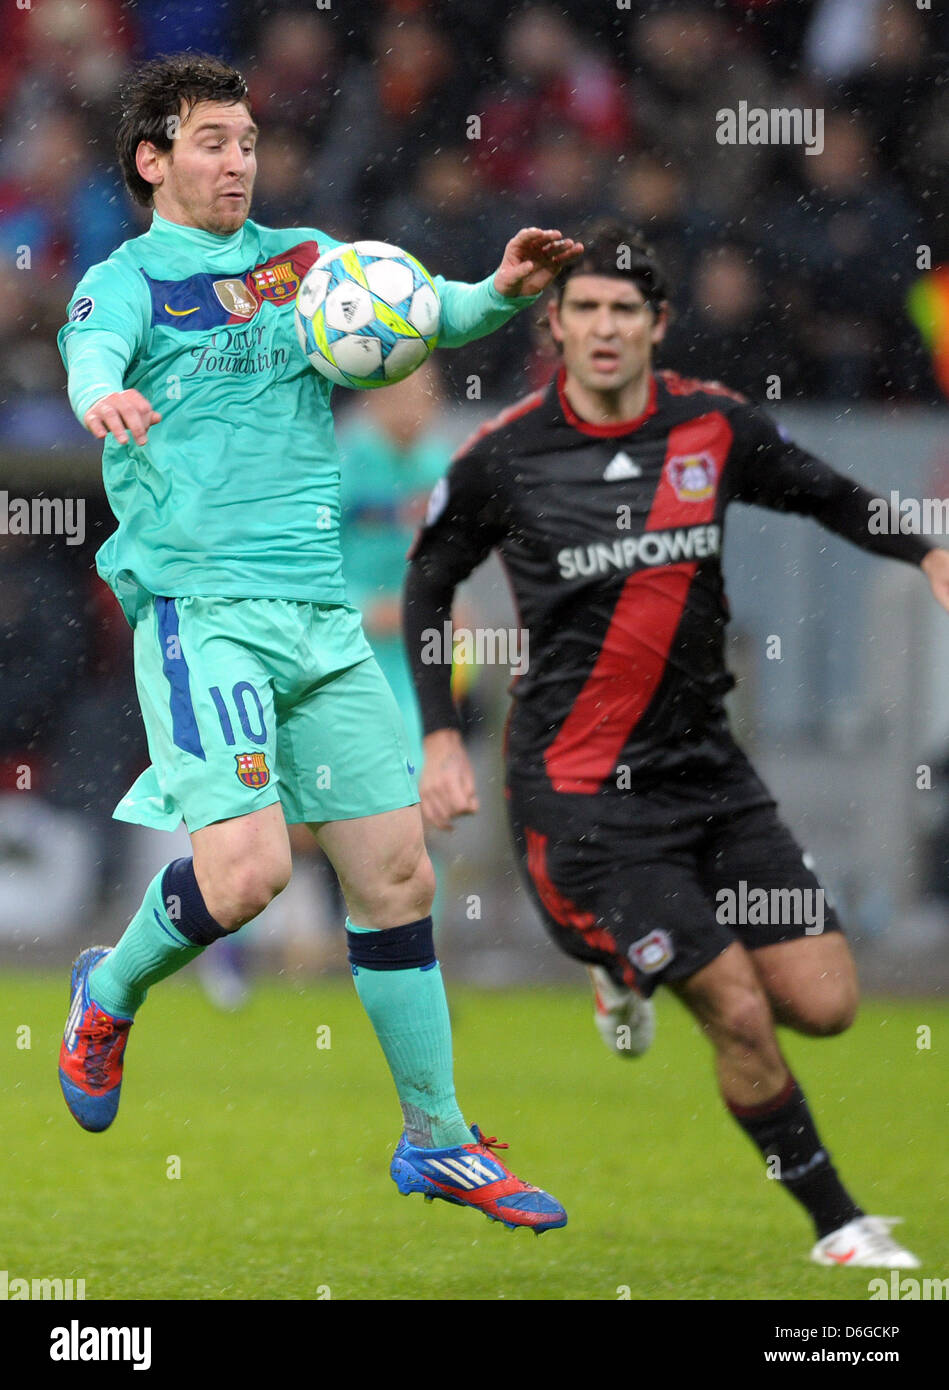 Barcelona's Lionel Messi (L) and Vedran Corluka of Leverkusen vie for the ball during the Champions League round of sixteen first leg soccer match between Bayer Leverkusen and FC Barcelona at the BayArena in Leverkusen, Germany, 14 February 2012. Photo: Federico Gambarini dpa/lnw  +++(c) dpa - Bildfunk+++ Stock Photo